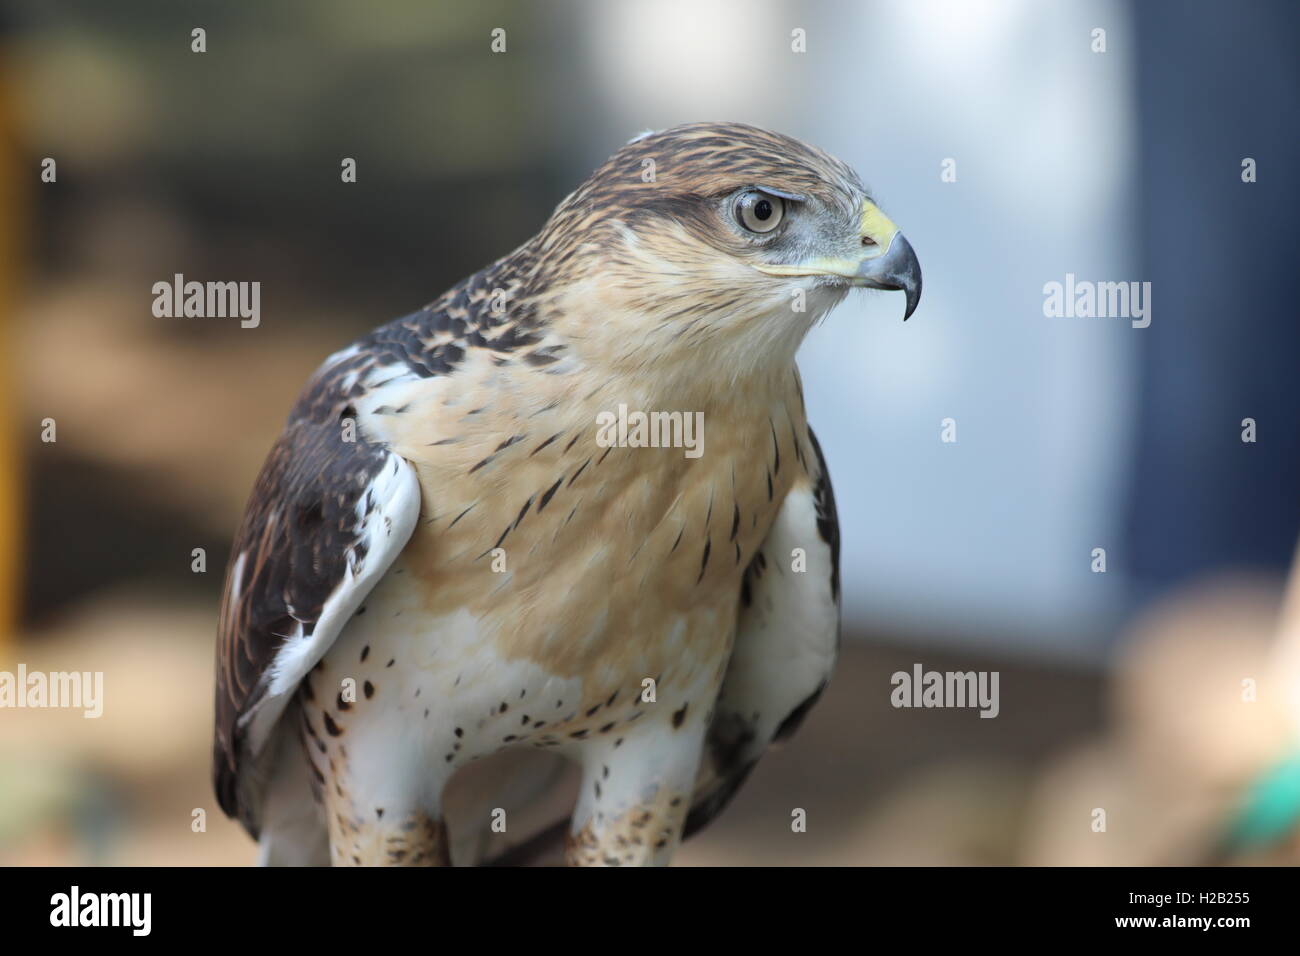 Hawk Red Tail Banque D'Images